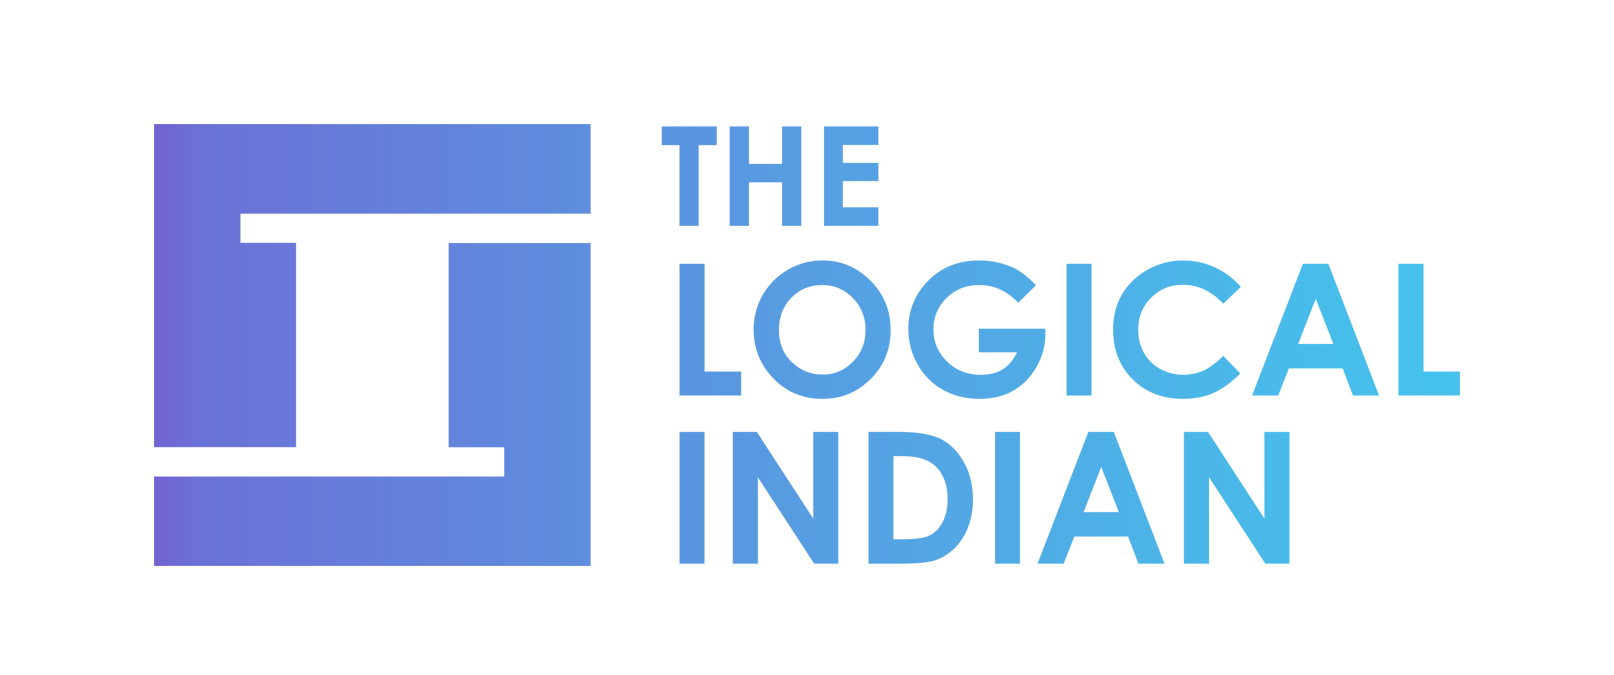 The Logical Indian